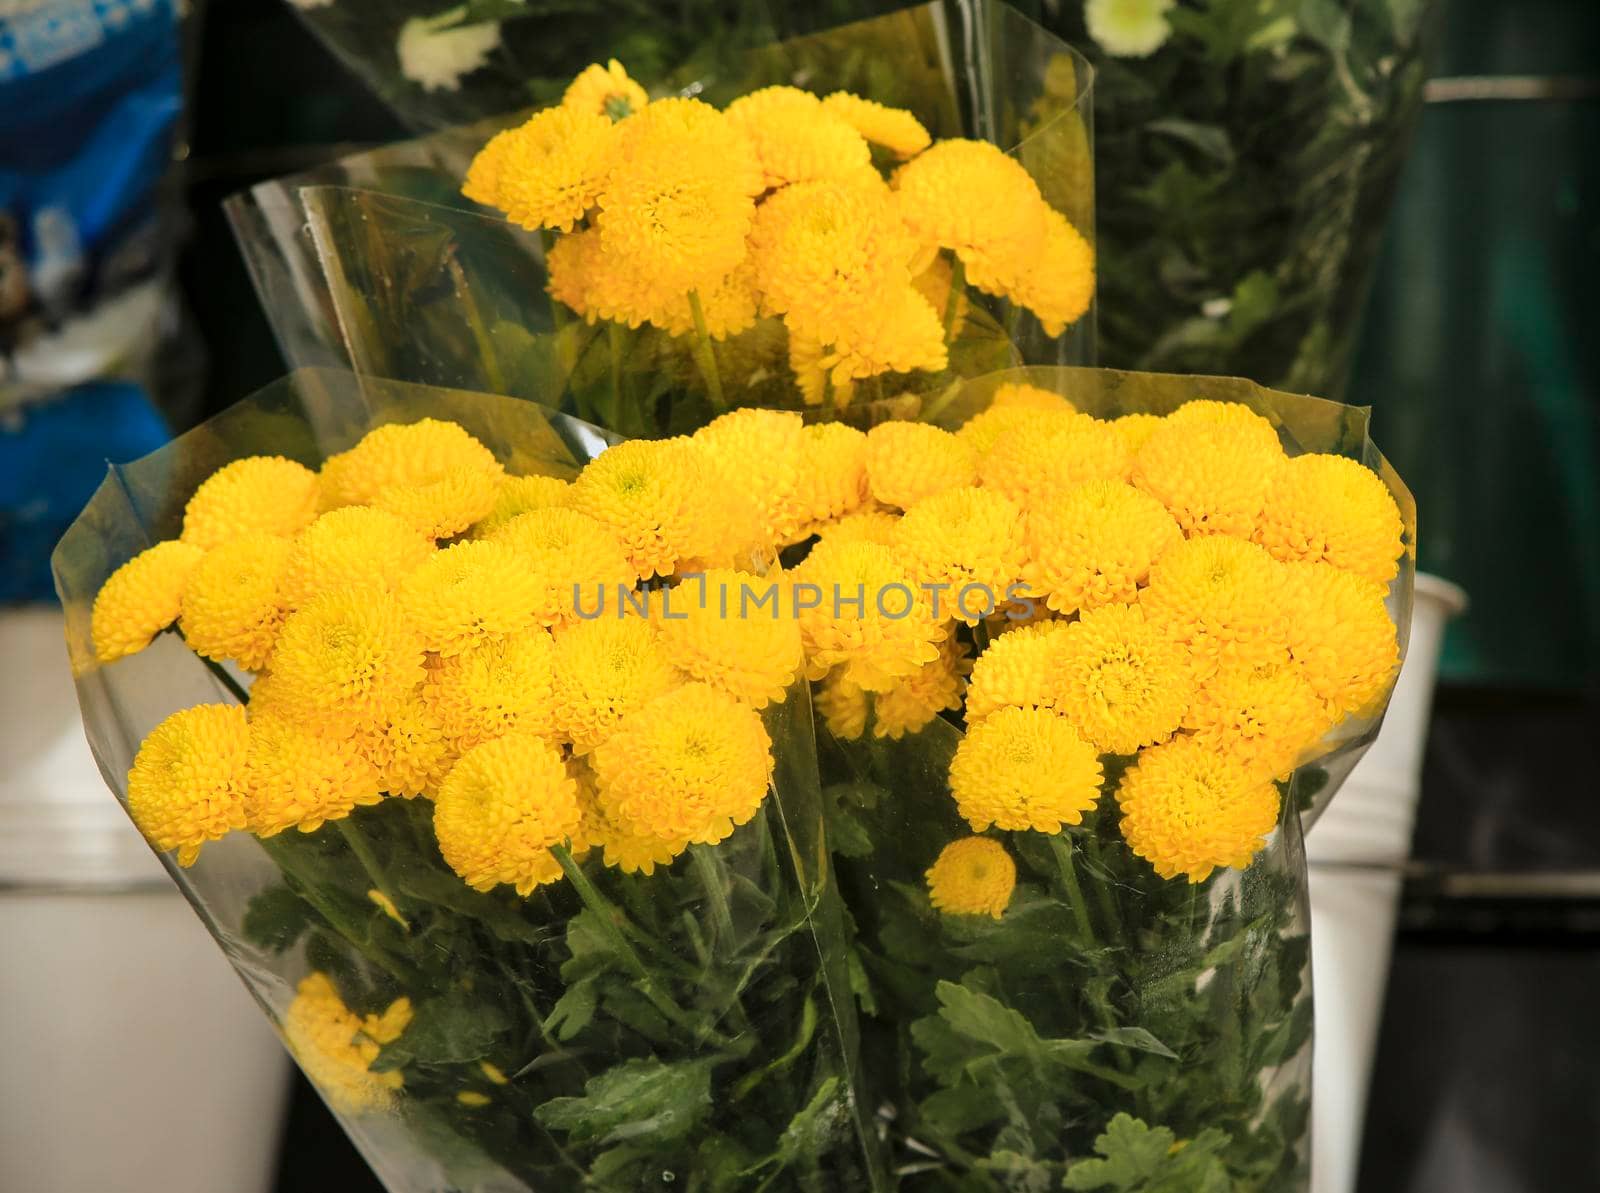 Bouquets of Tagetes Erecta flowers for sale at a market stall in Spain